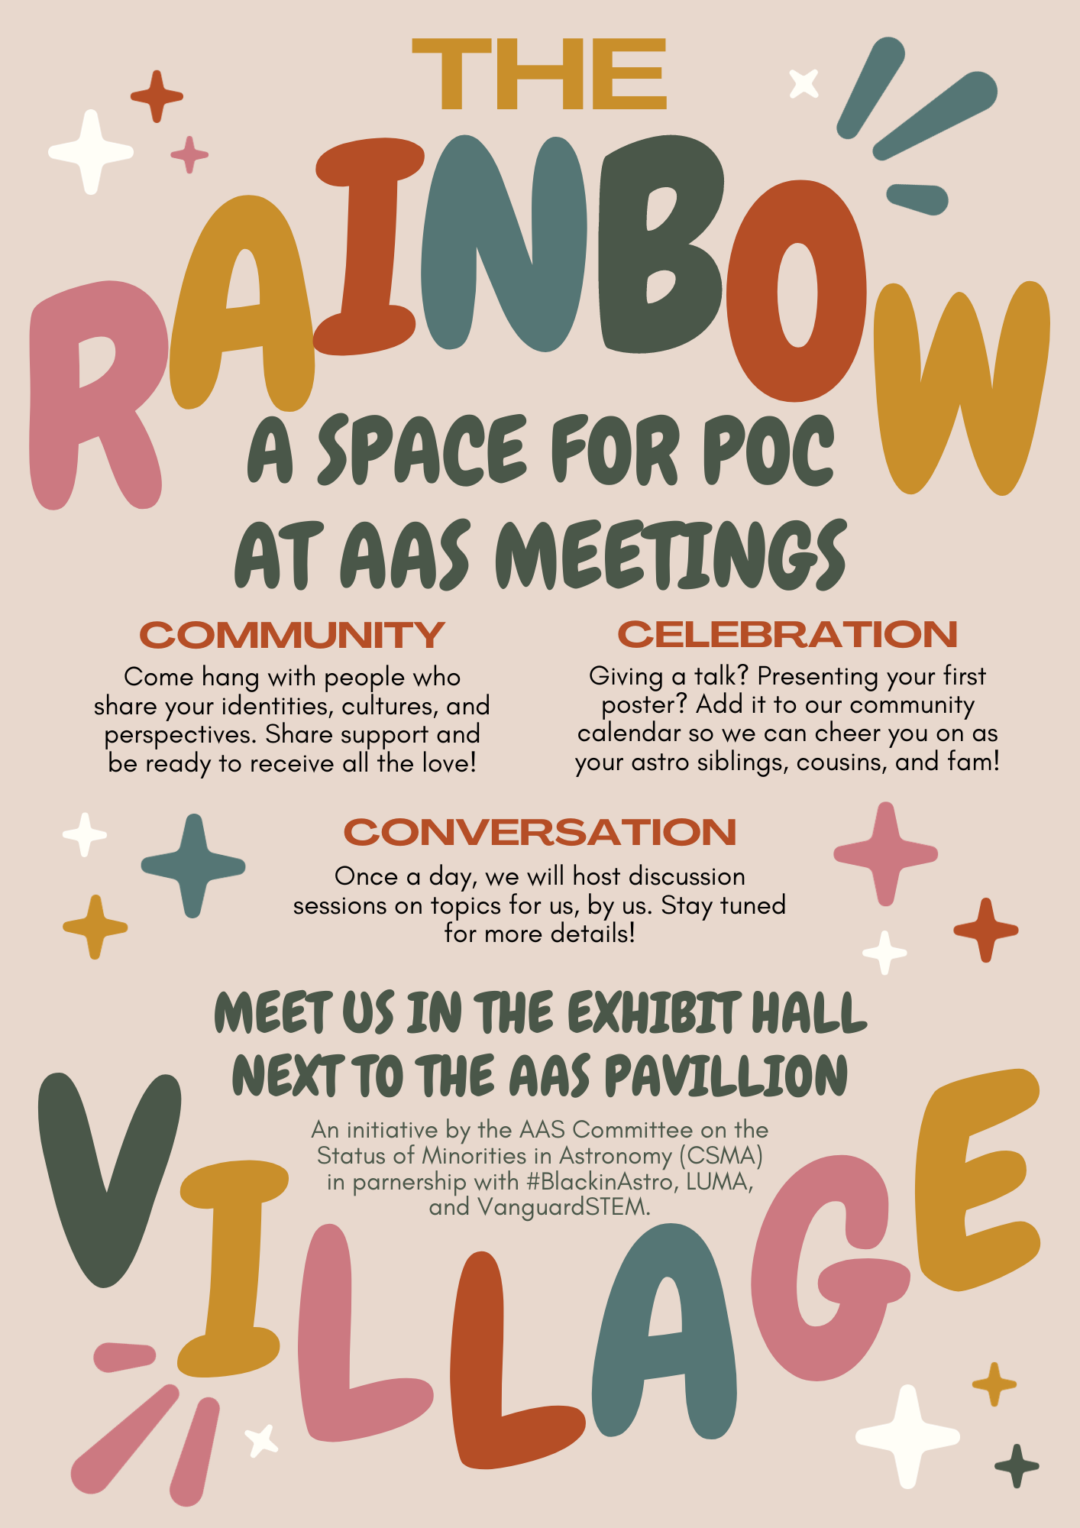 Poster advertising the Rainbow Village at AAS 243